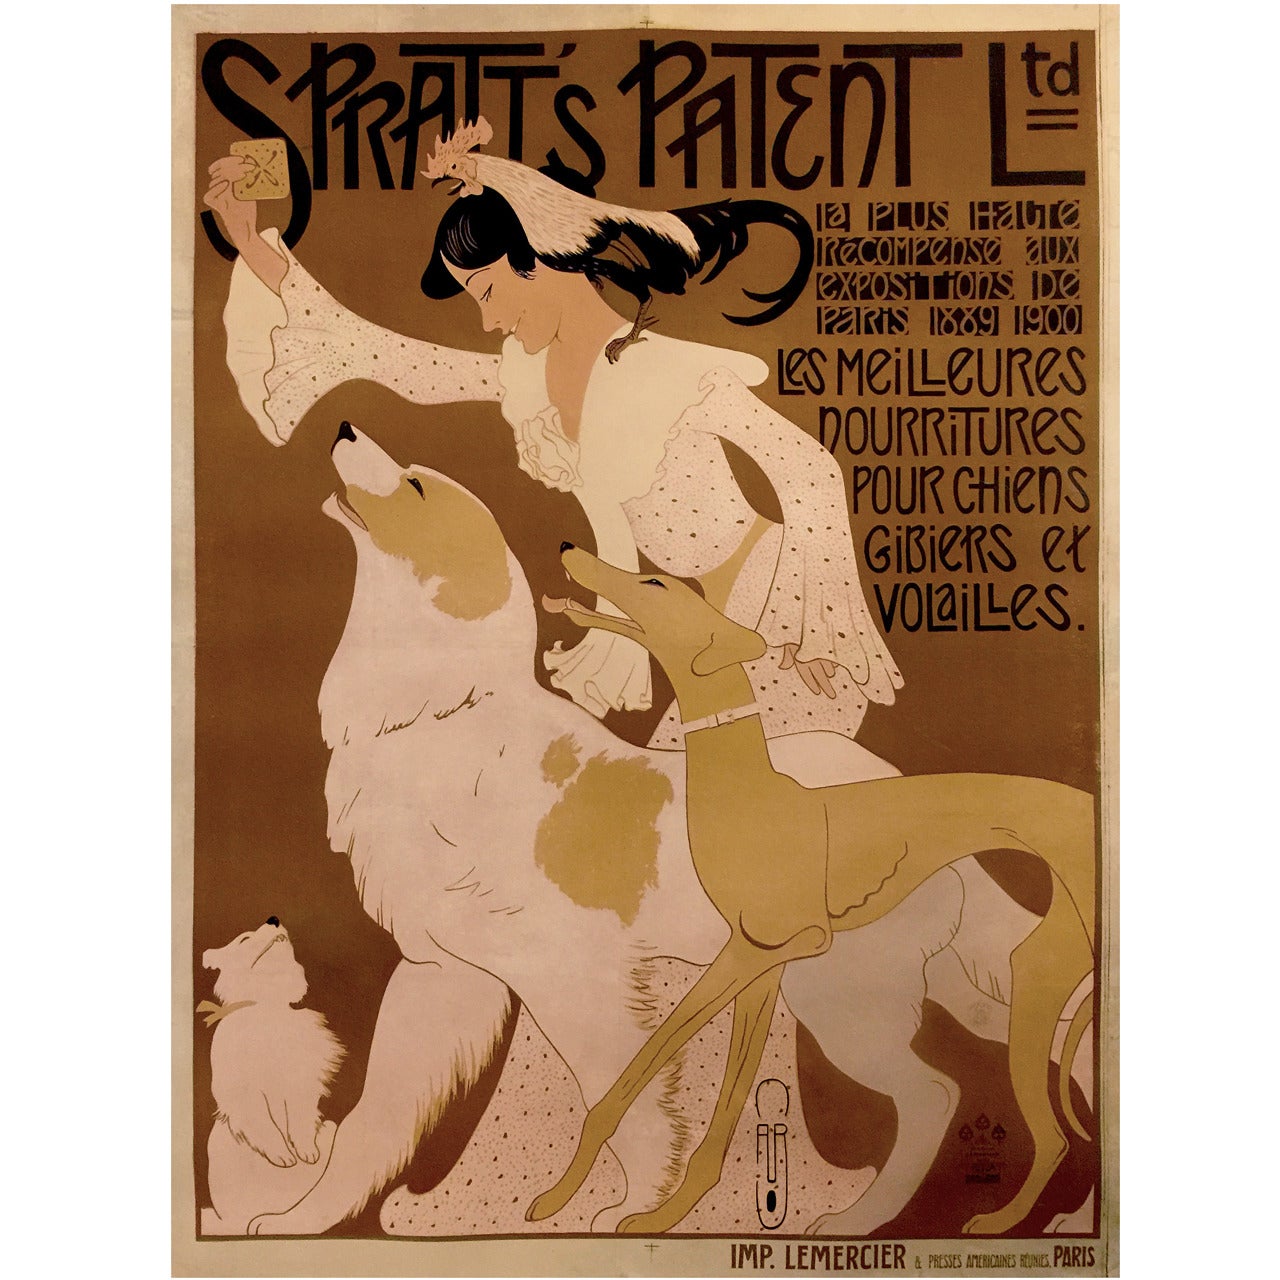 French Art Nouveau Period Advertising Poster for "Spratt's Patent Ltd., " 1909 For Sale